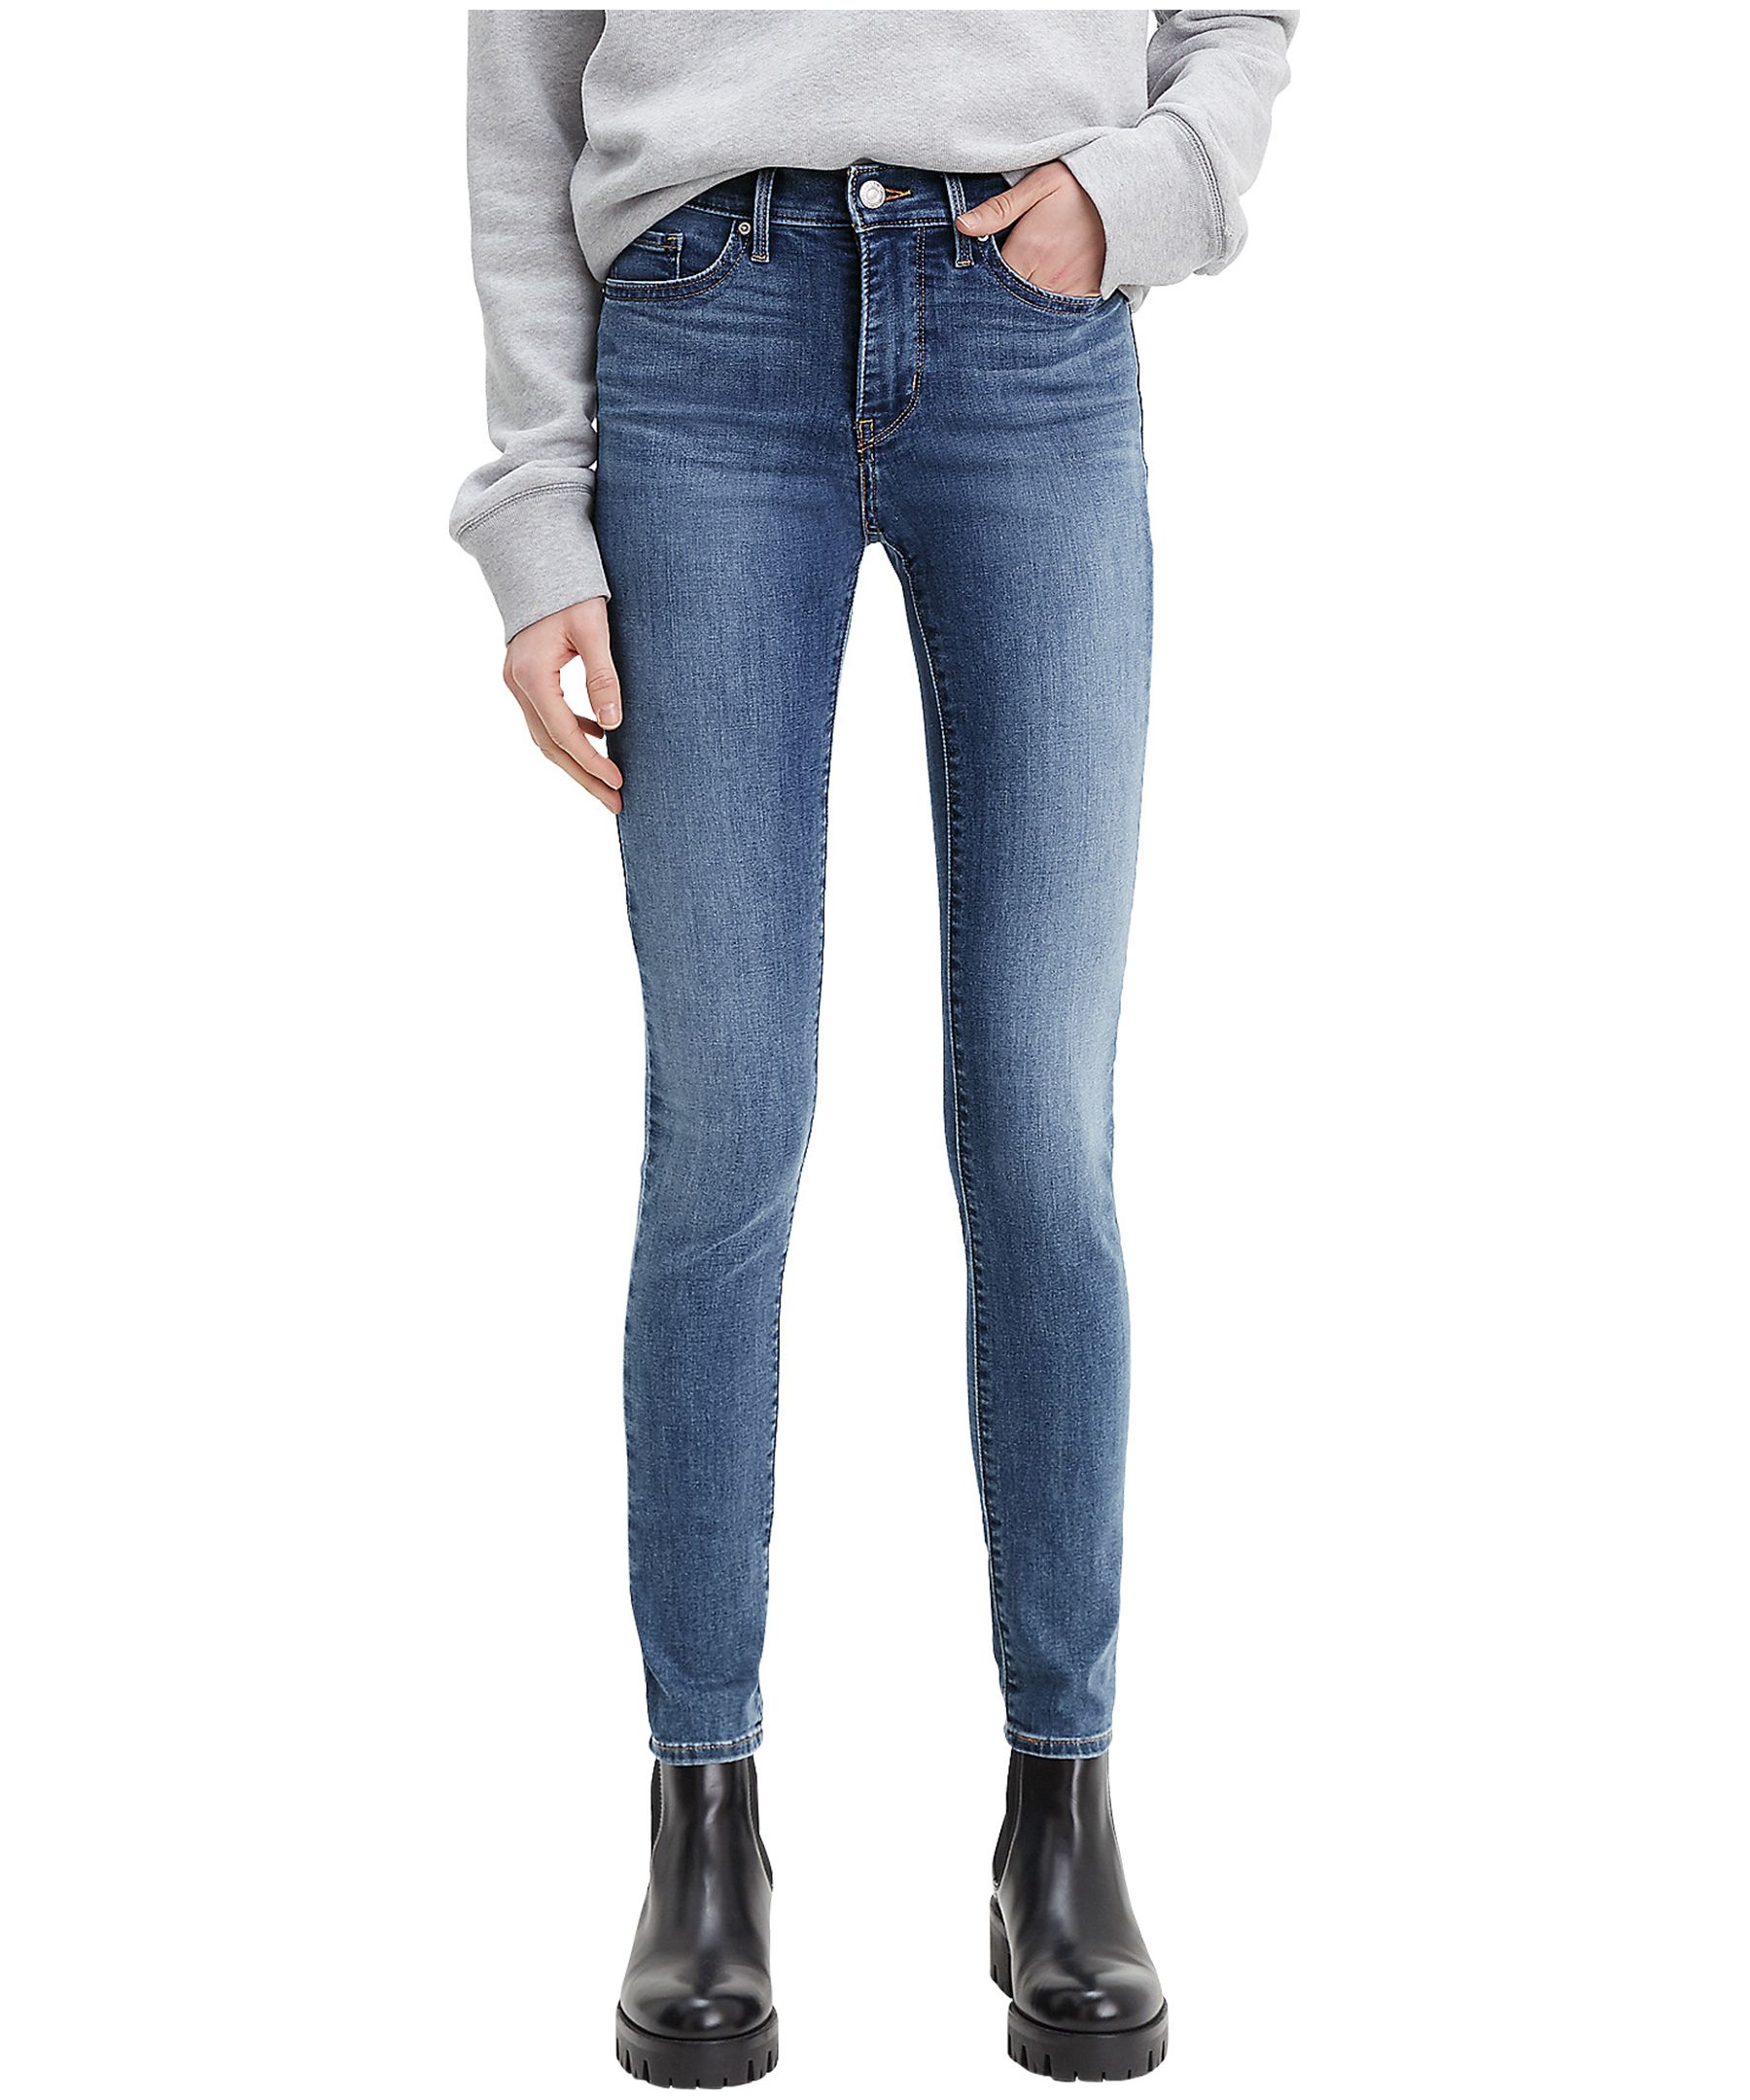 Levi's Women's 311 Shaping Mid Rise Skinny Jeans Lapis Gallop - Dark Stone  Wash